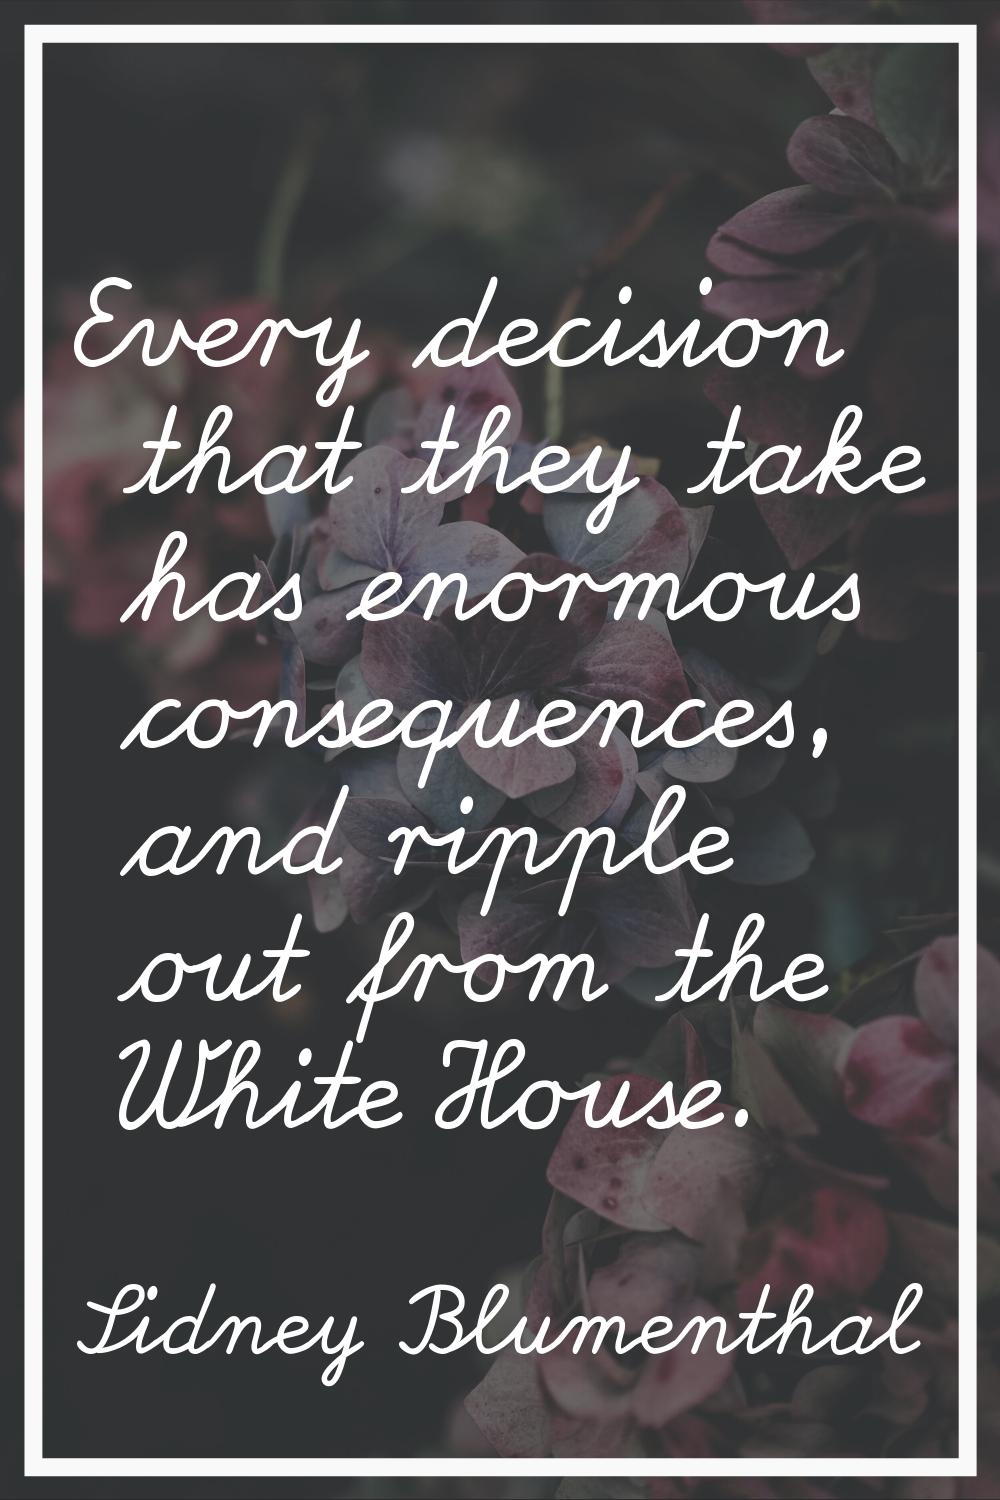 Every decision that they take has enormous consequences, and ripple out from the White House.